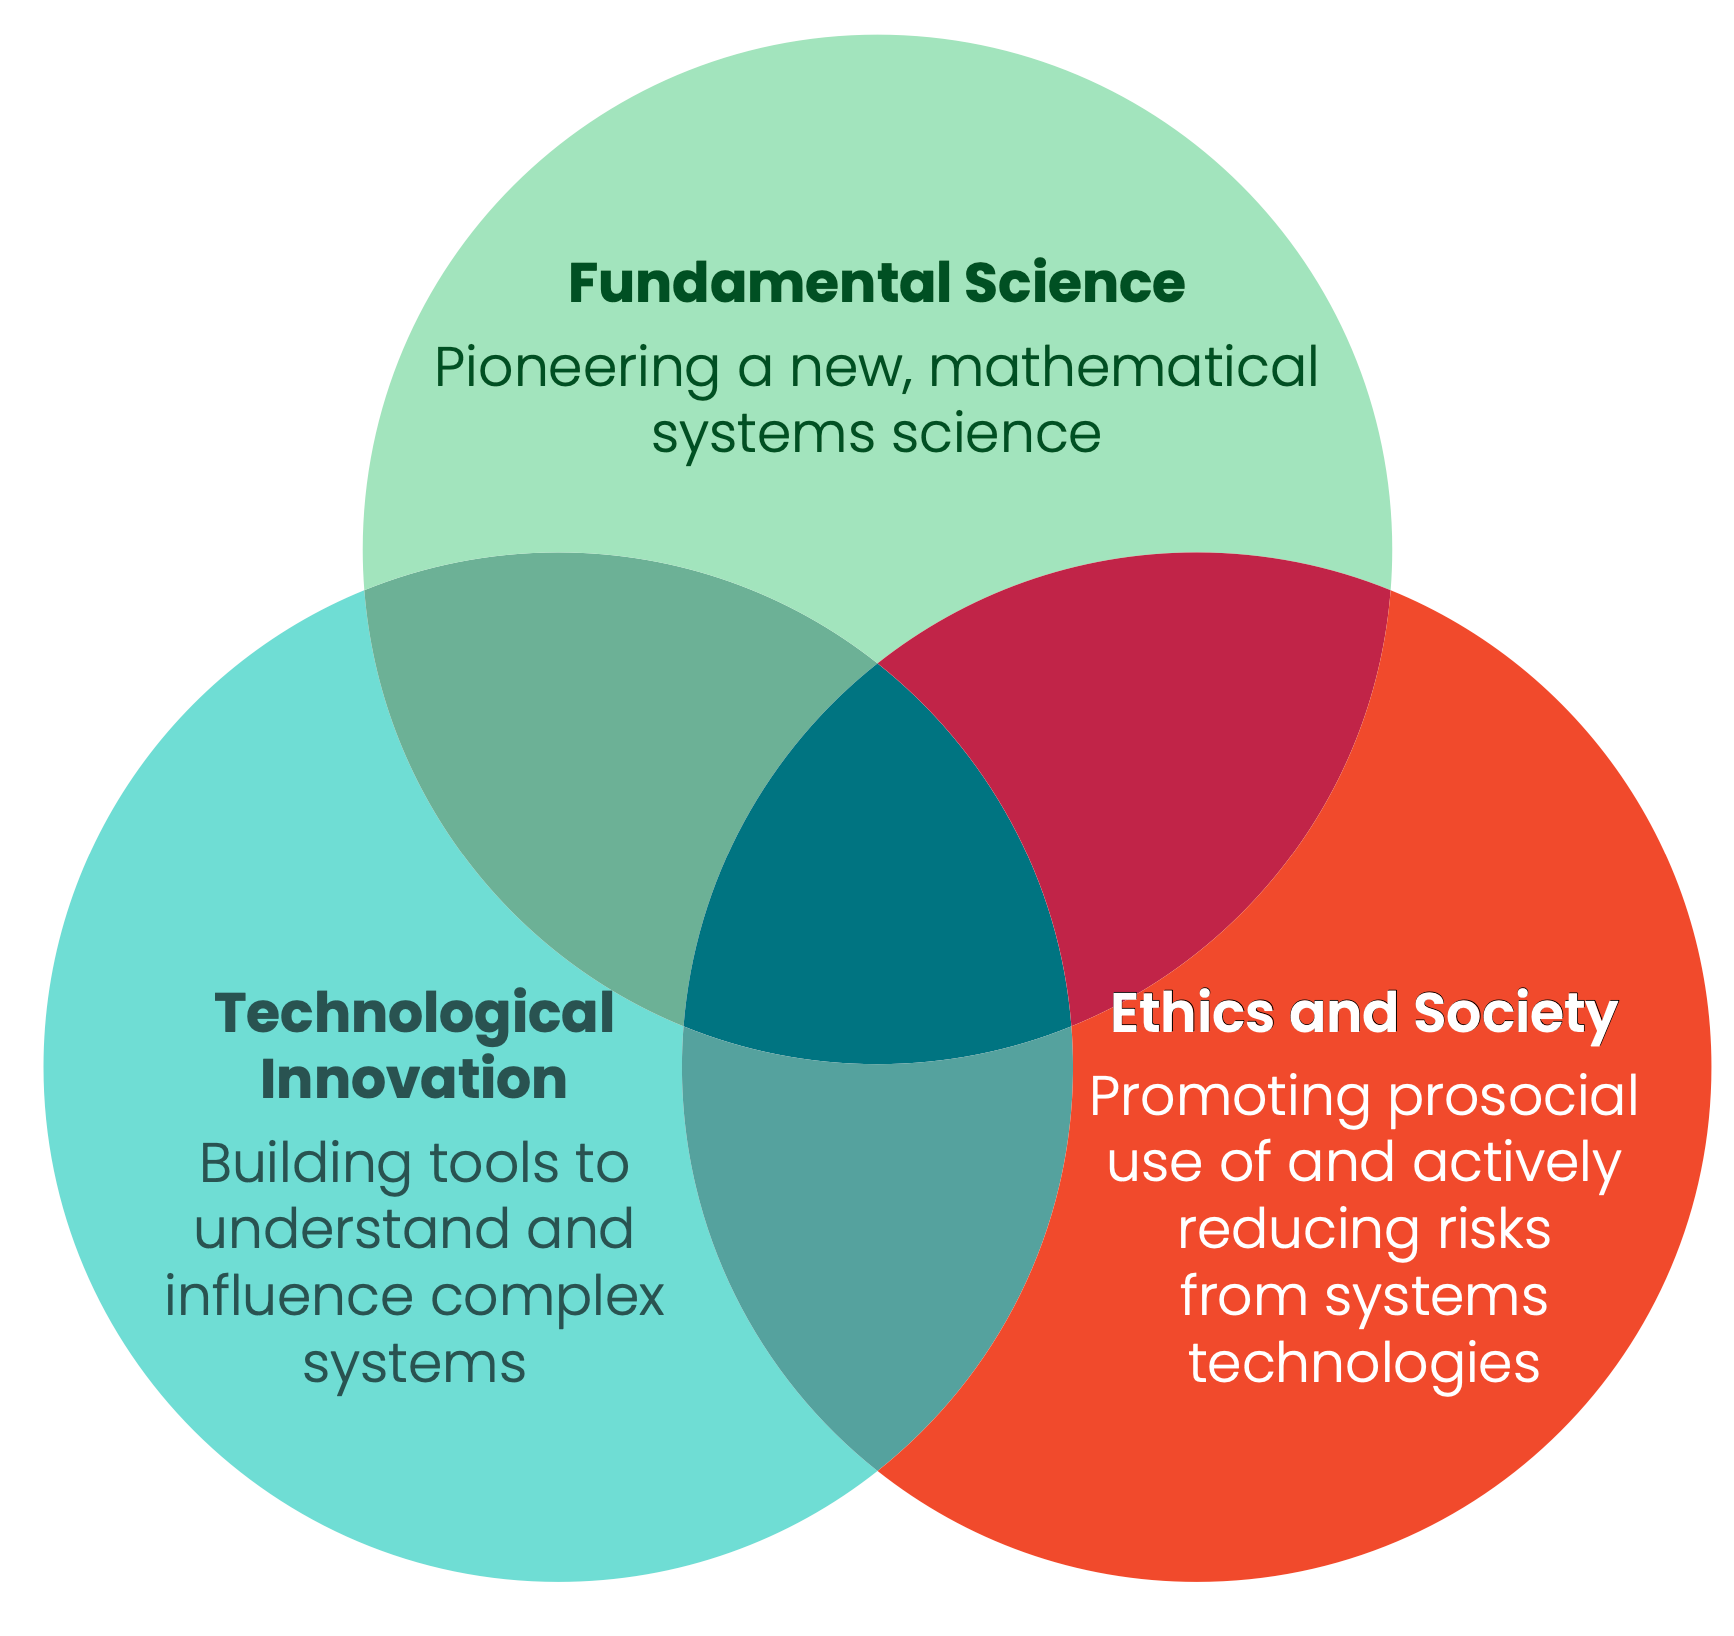 A Venn diagram consisting of three circles, labelled Fundamental Science, Ethics and Society, and Technological Innovation